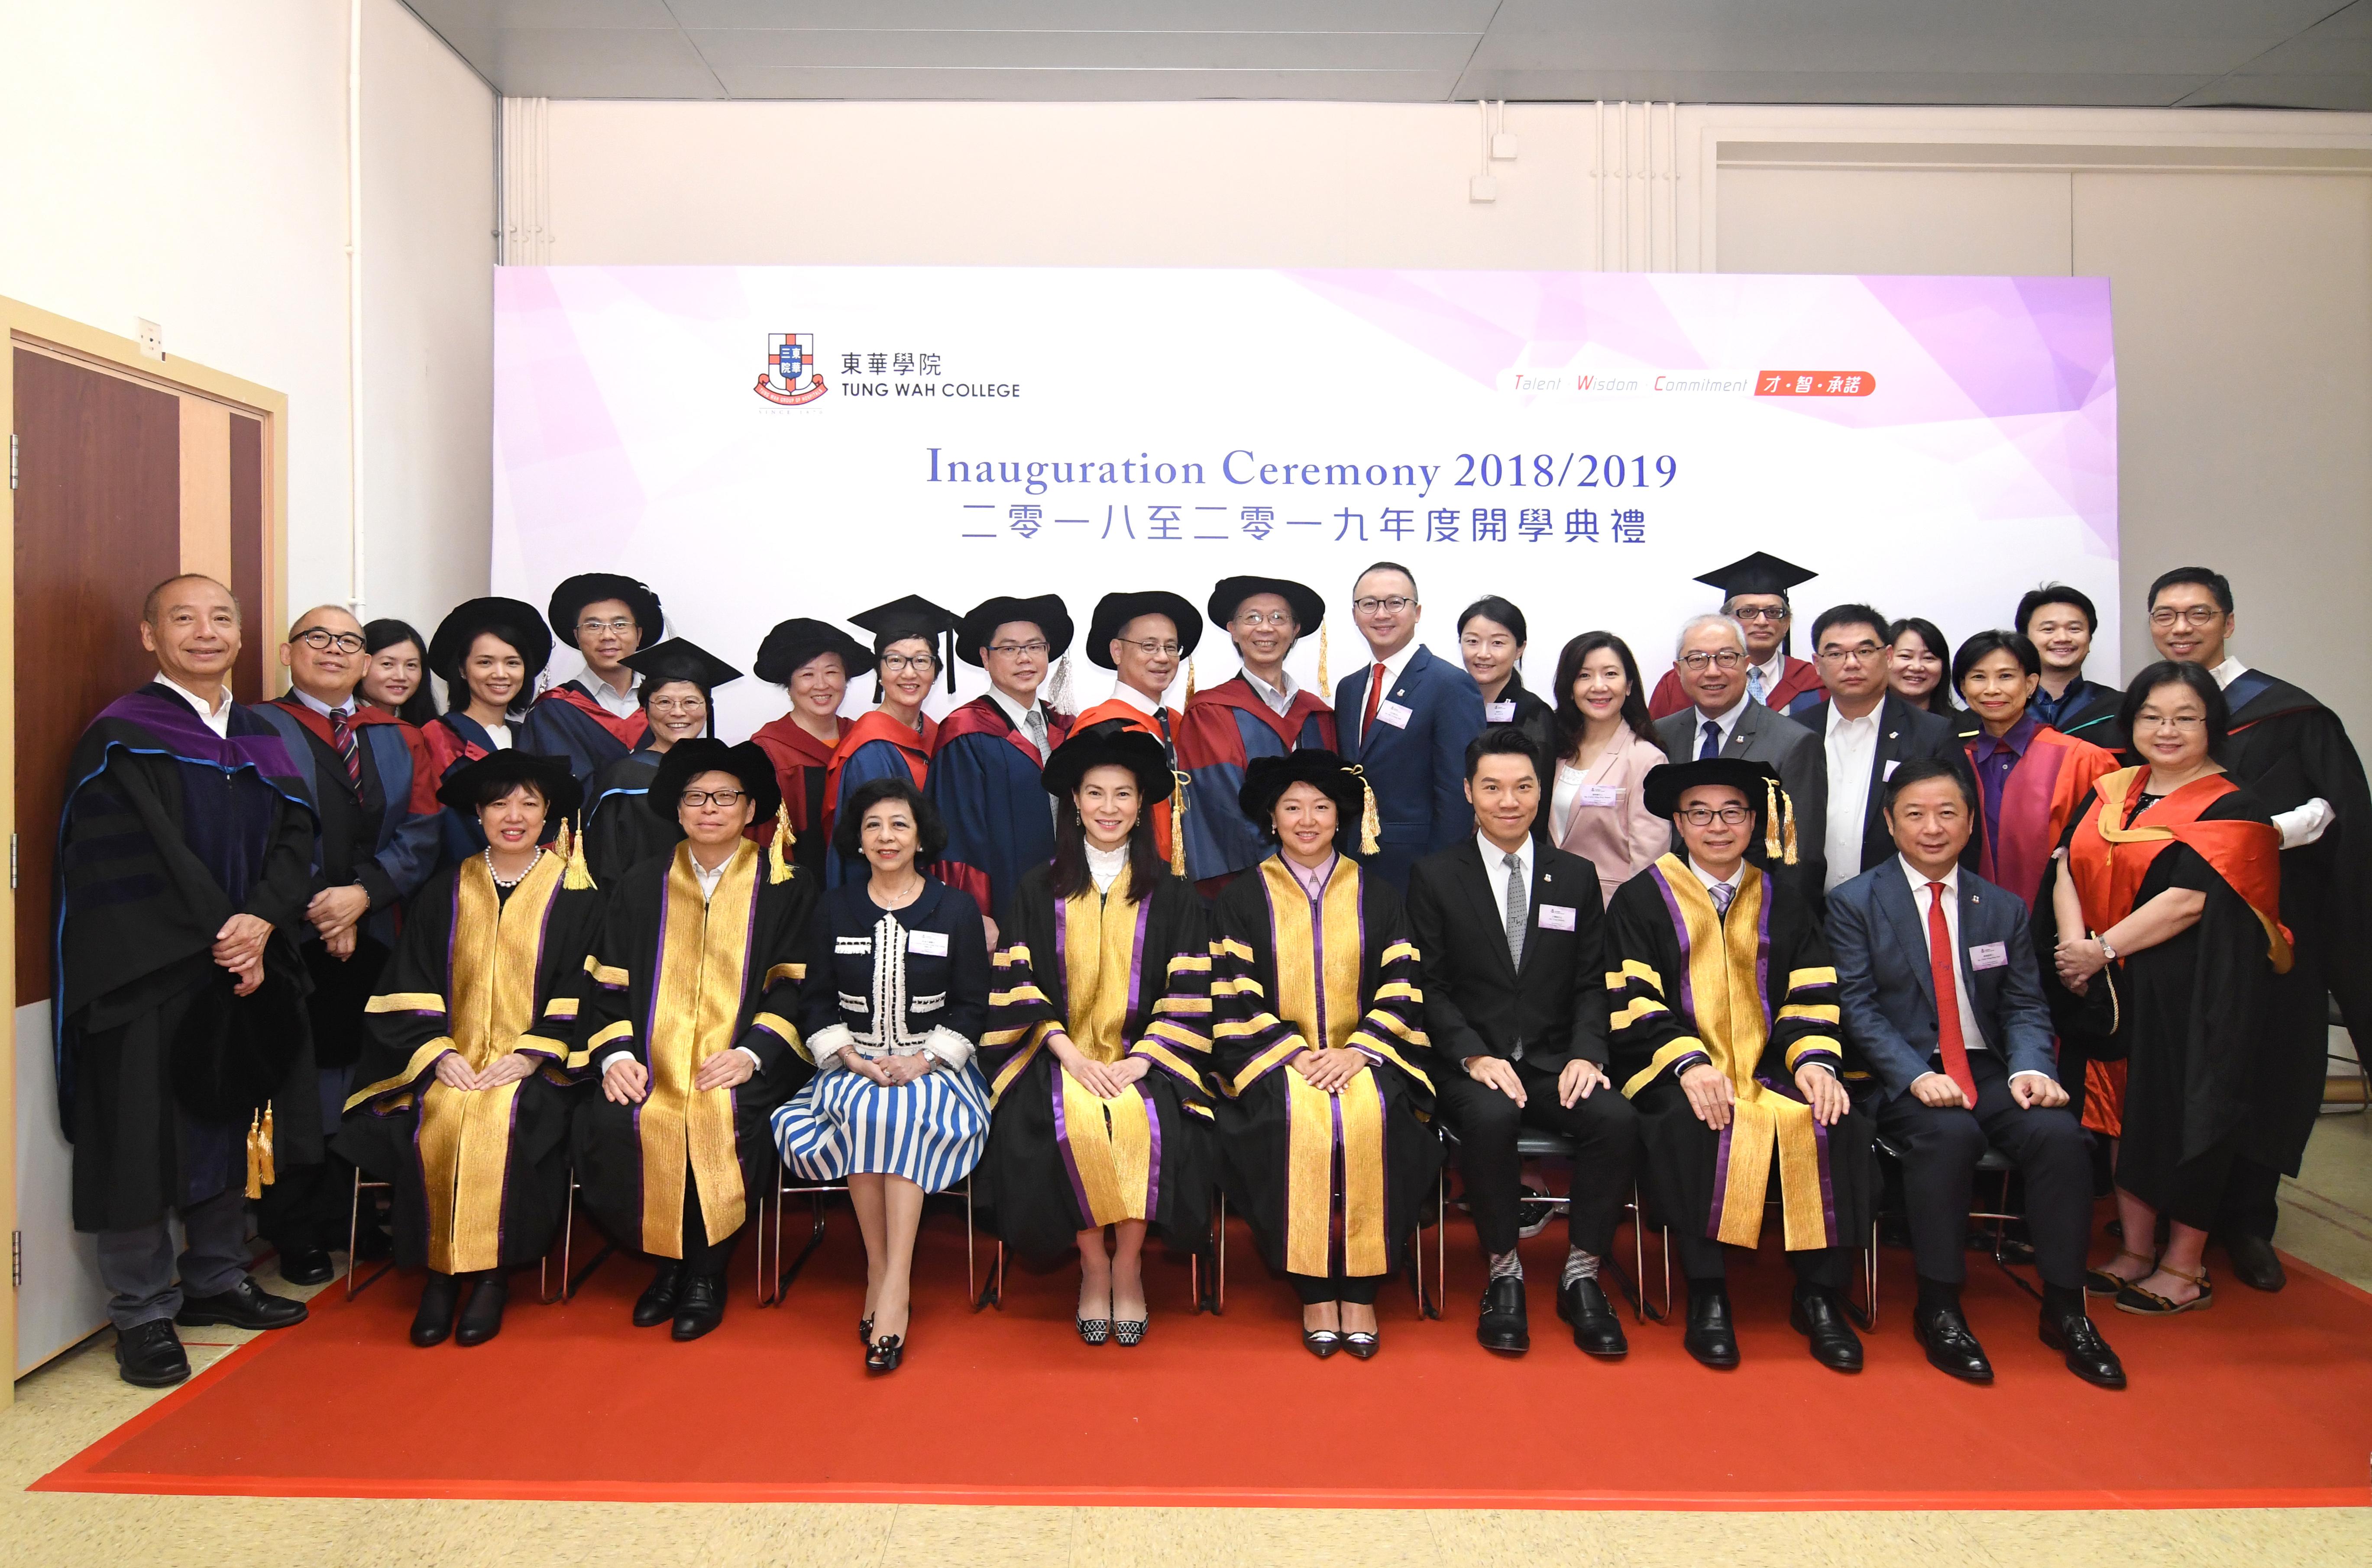 Tung Wah College Inauguration Ceremony 2018/2019